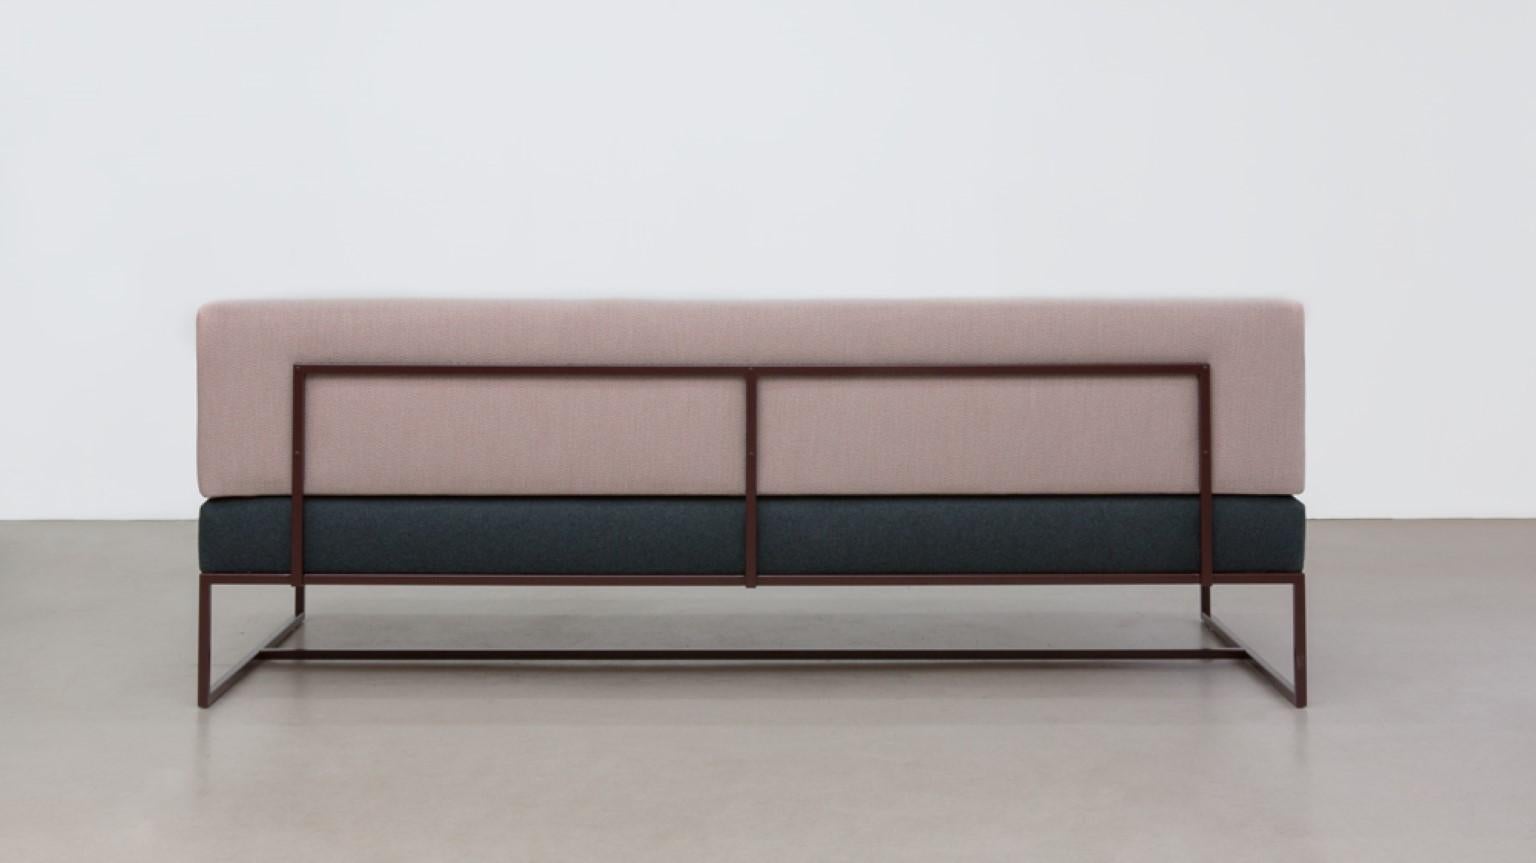 German Circus Couch by Llot Llov